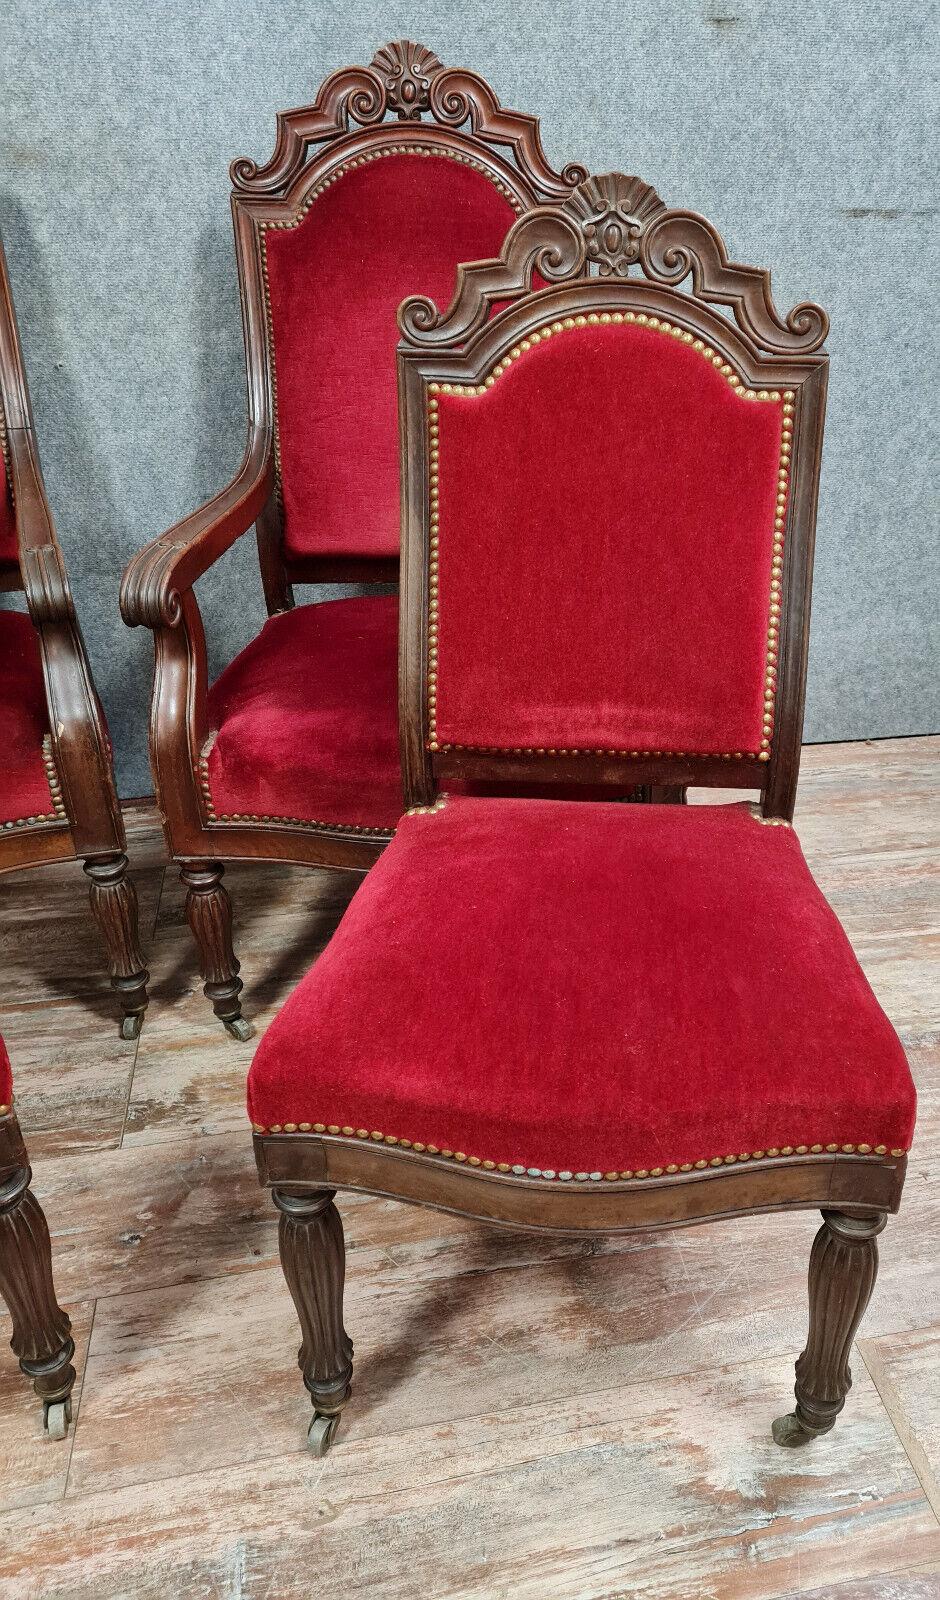 Early 19th Century Exquisite Set of 4 Restauration Period Mahogany Chairs, circa 1820 -1X32 For Sale